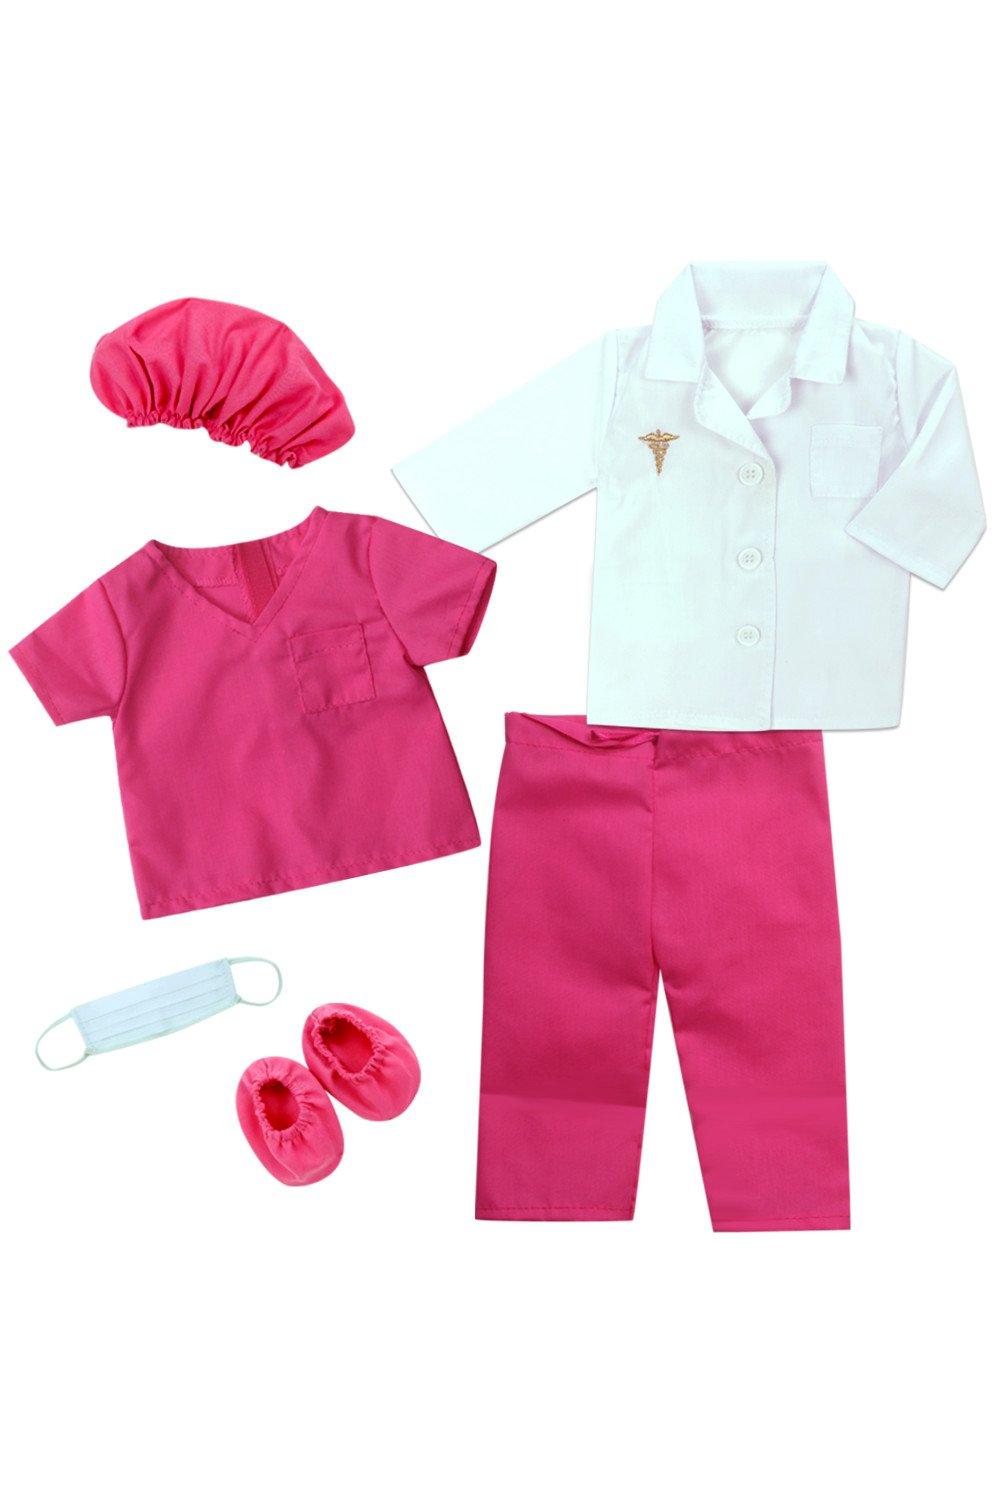 Sophia’s 6 Piece 18" Doll Doctors Outfit with Accessories & Doll Shoes